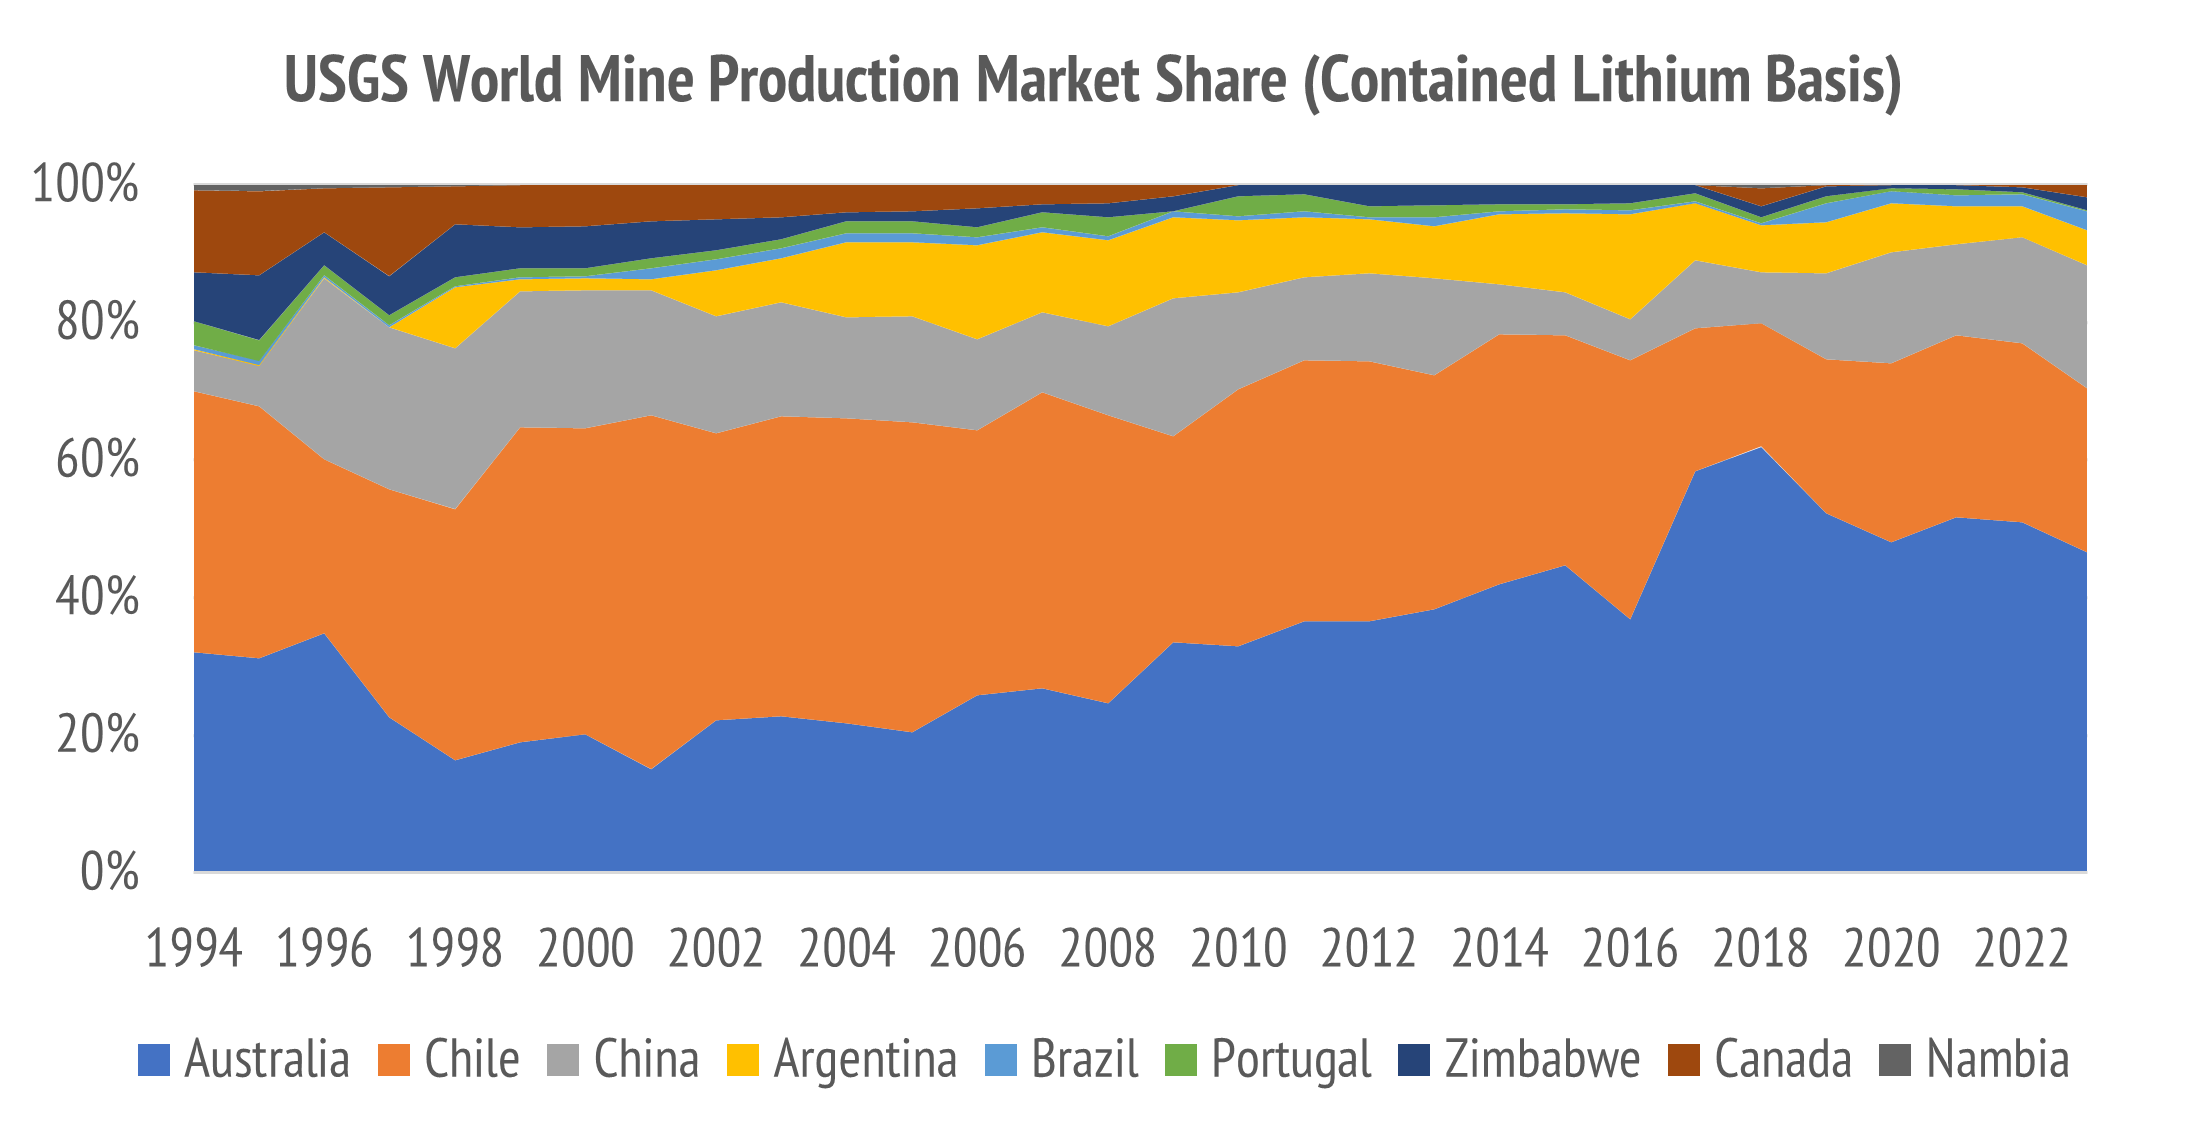 Australia retains the largest global market share as a source of lithium albeit declining since 2018.